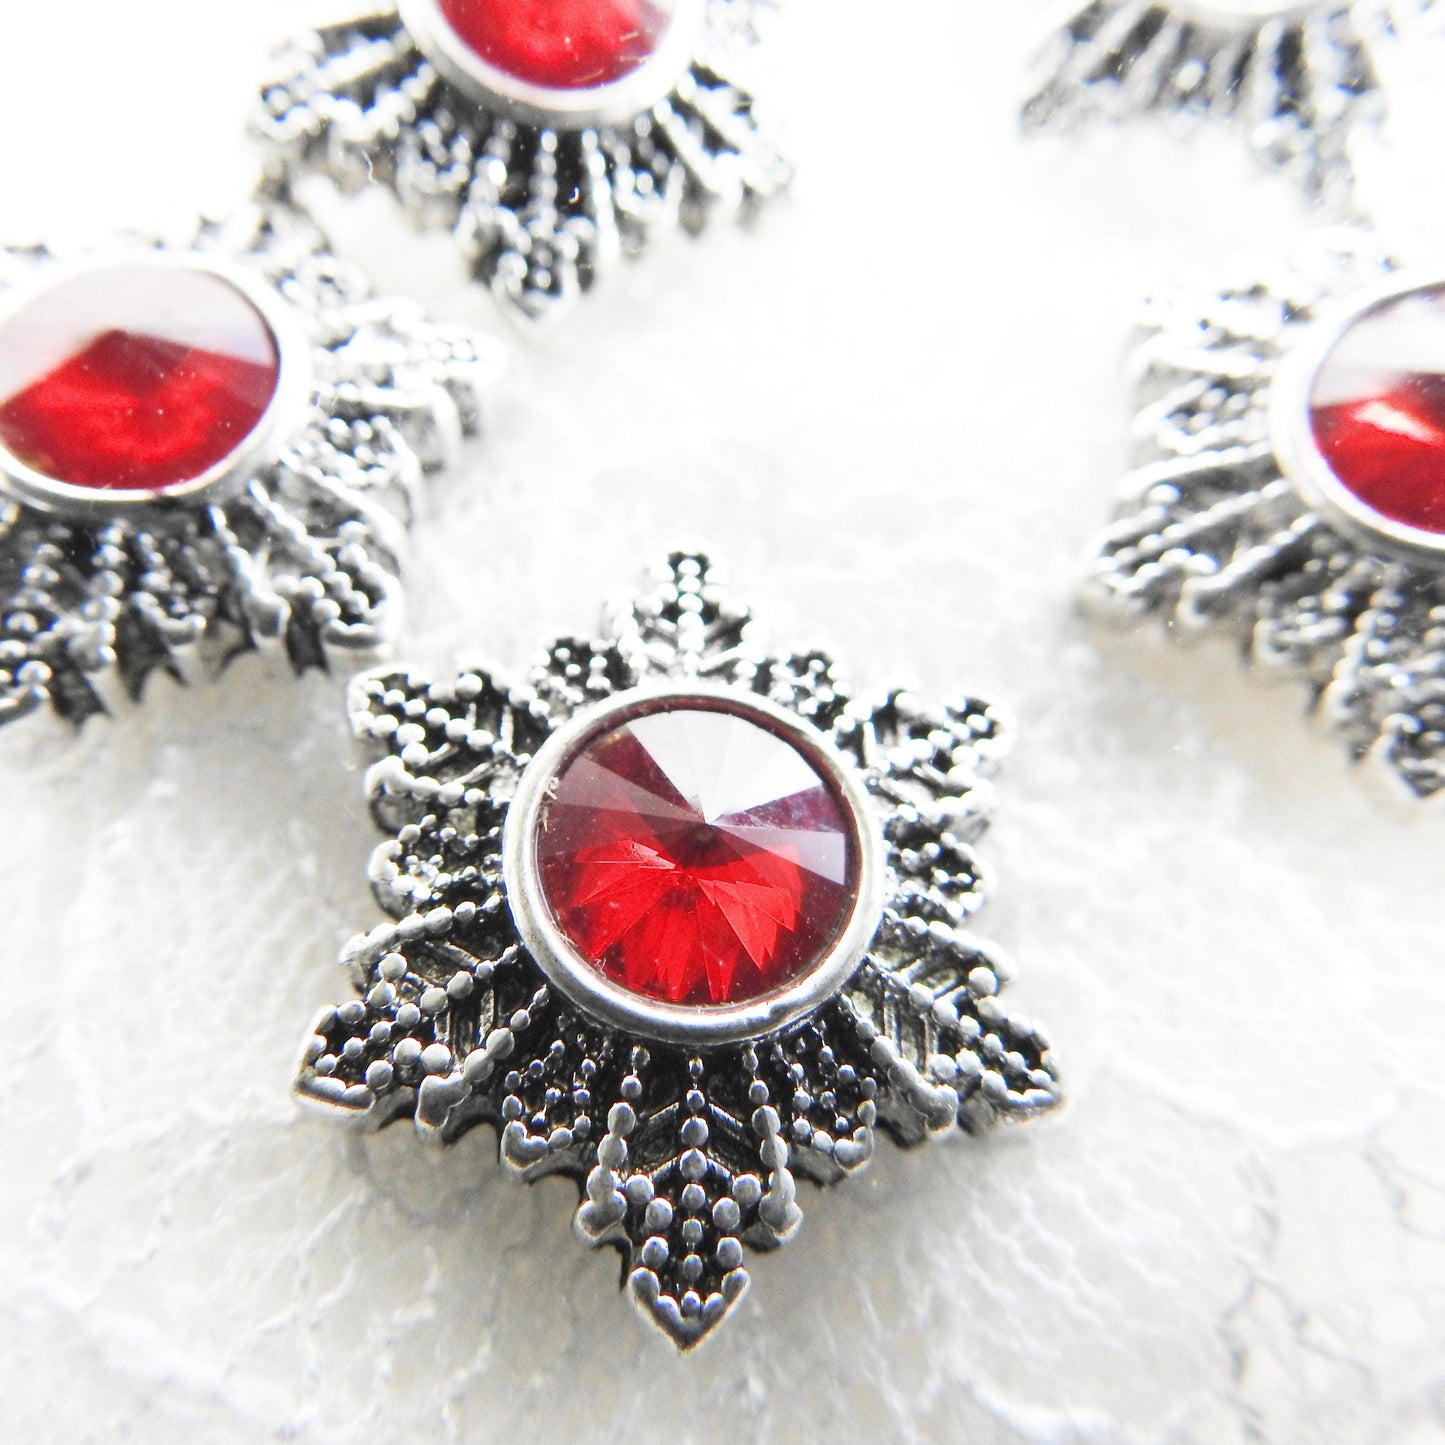 Snowflake buttons for jewelry